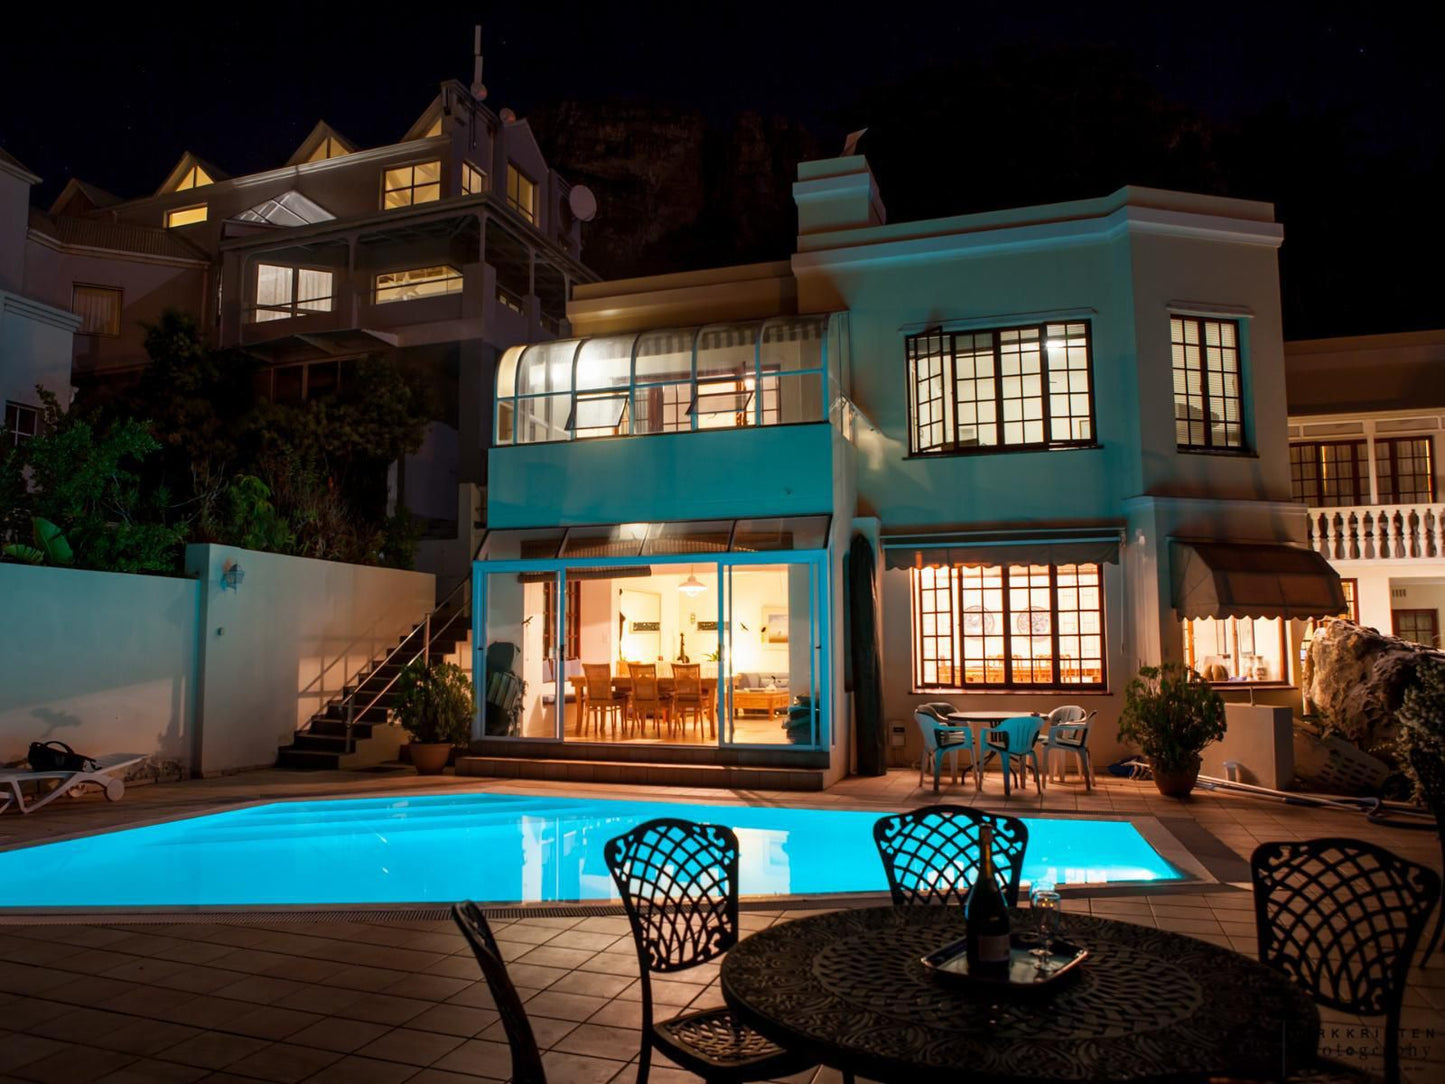 Panorama Guest House Newlands Cape Town Western Cape South Africa House, Building, Architecture, Swimming Pool